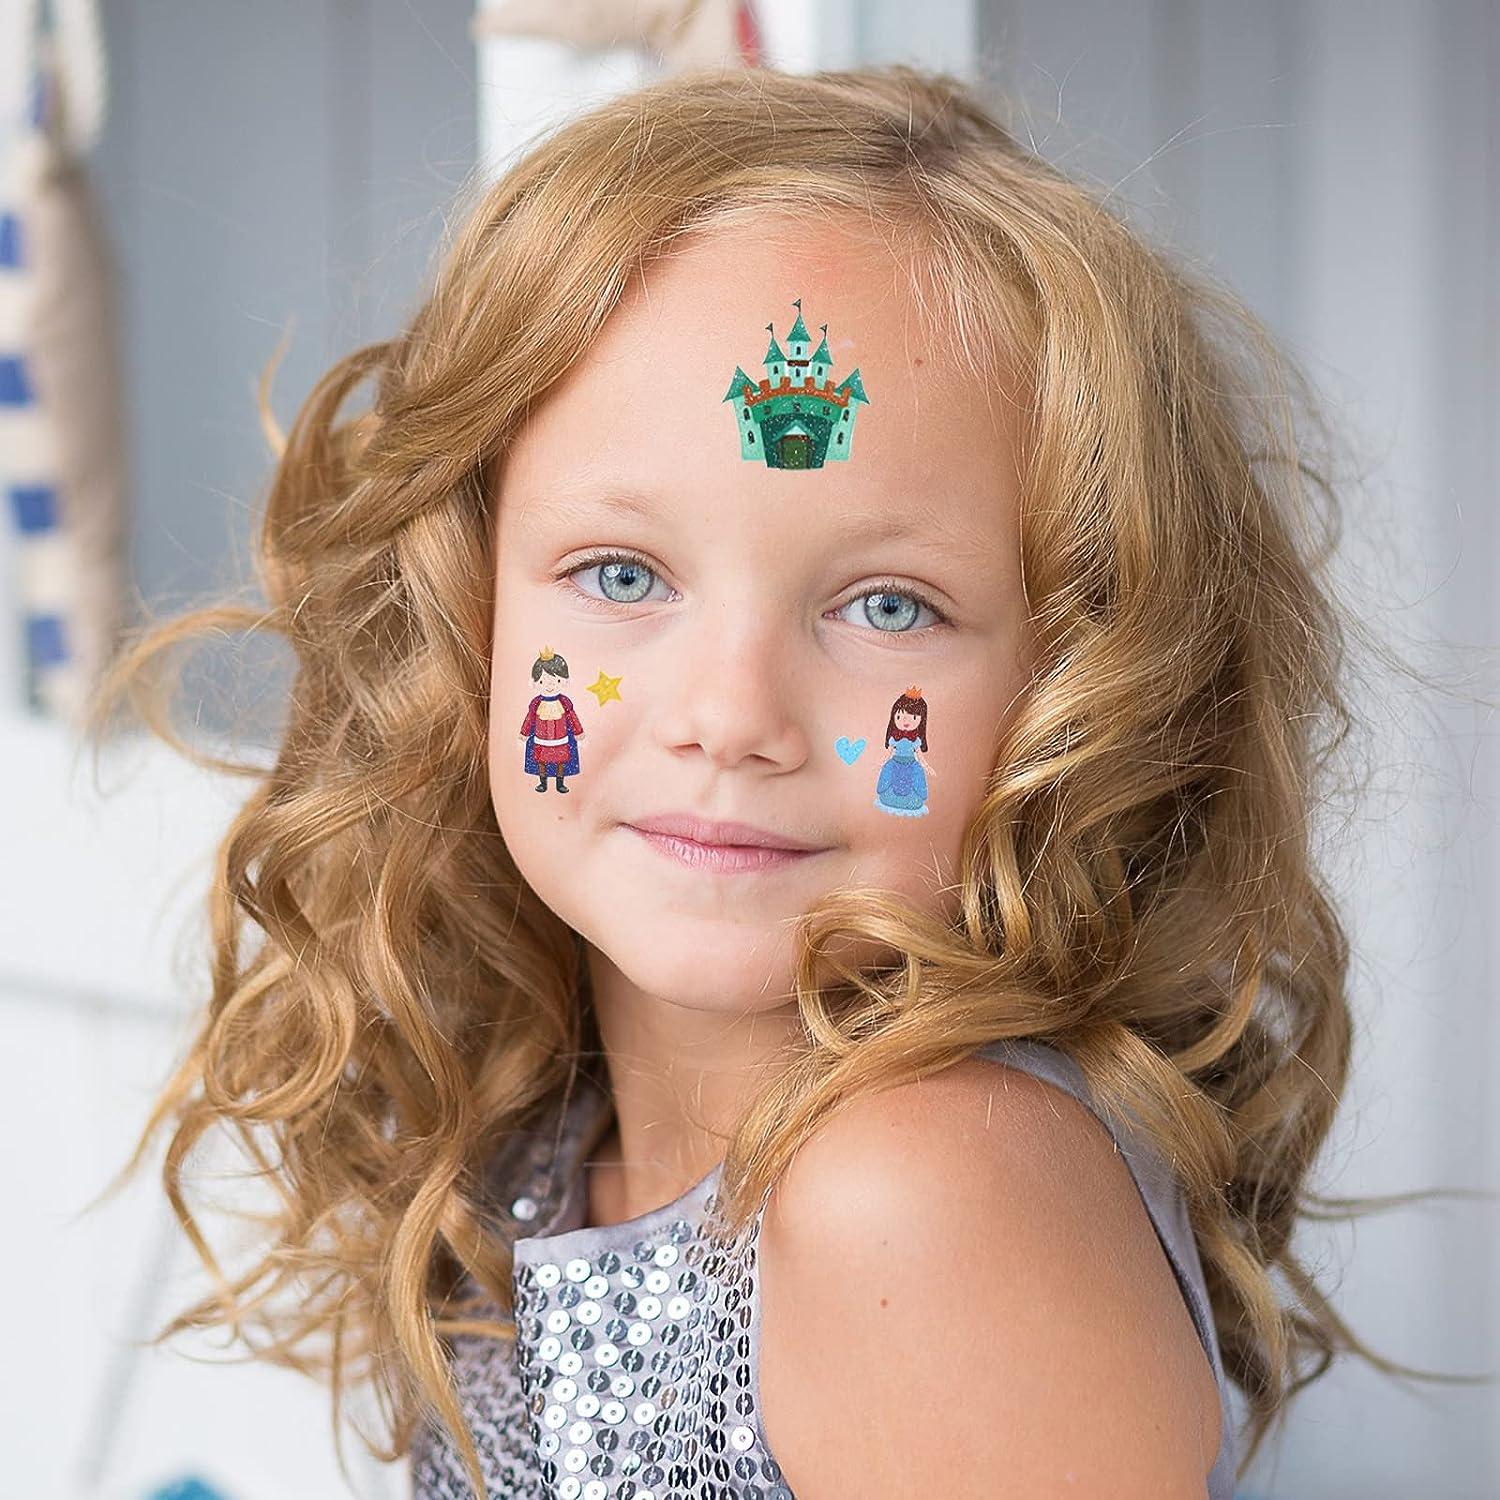 Amazon.com : AOMIG Temporary Tattoo for Kids, 10 Sheets Glow In The Dark  Cartoon Flower Fairy Tattoo Stickers, Waterproof Luminous Fake Tattoo  Stickers Set for Boys Girls Birthday Party Bag Filler :